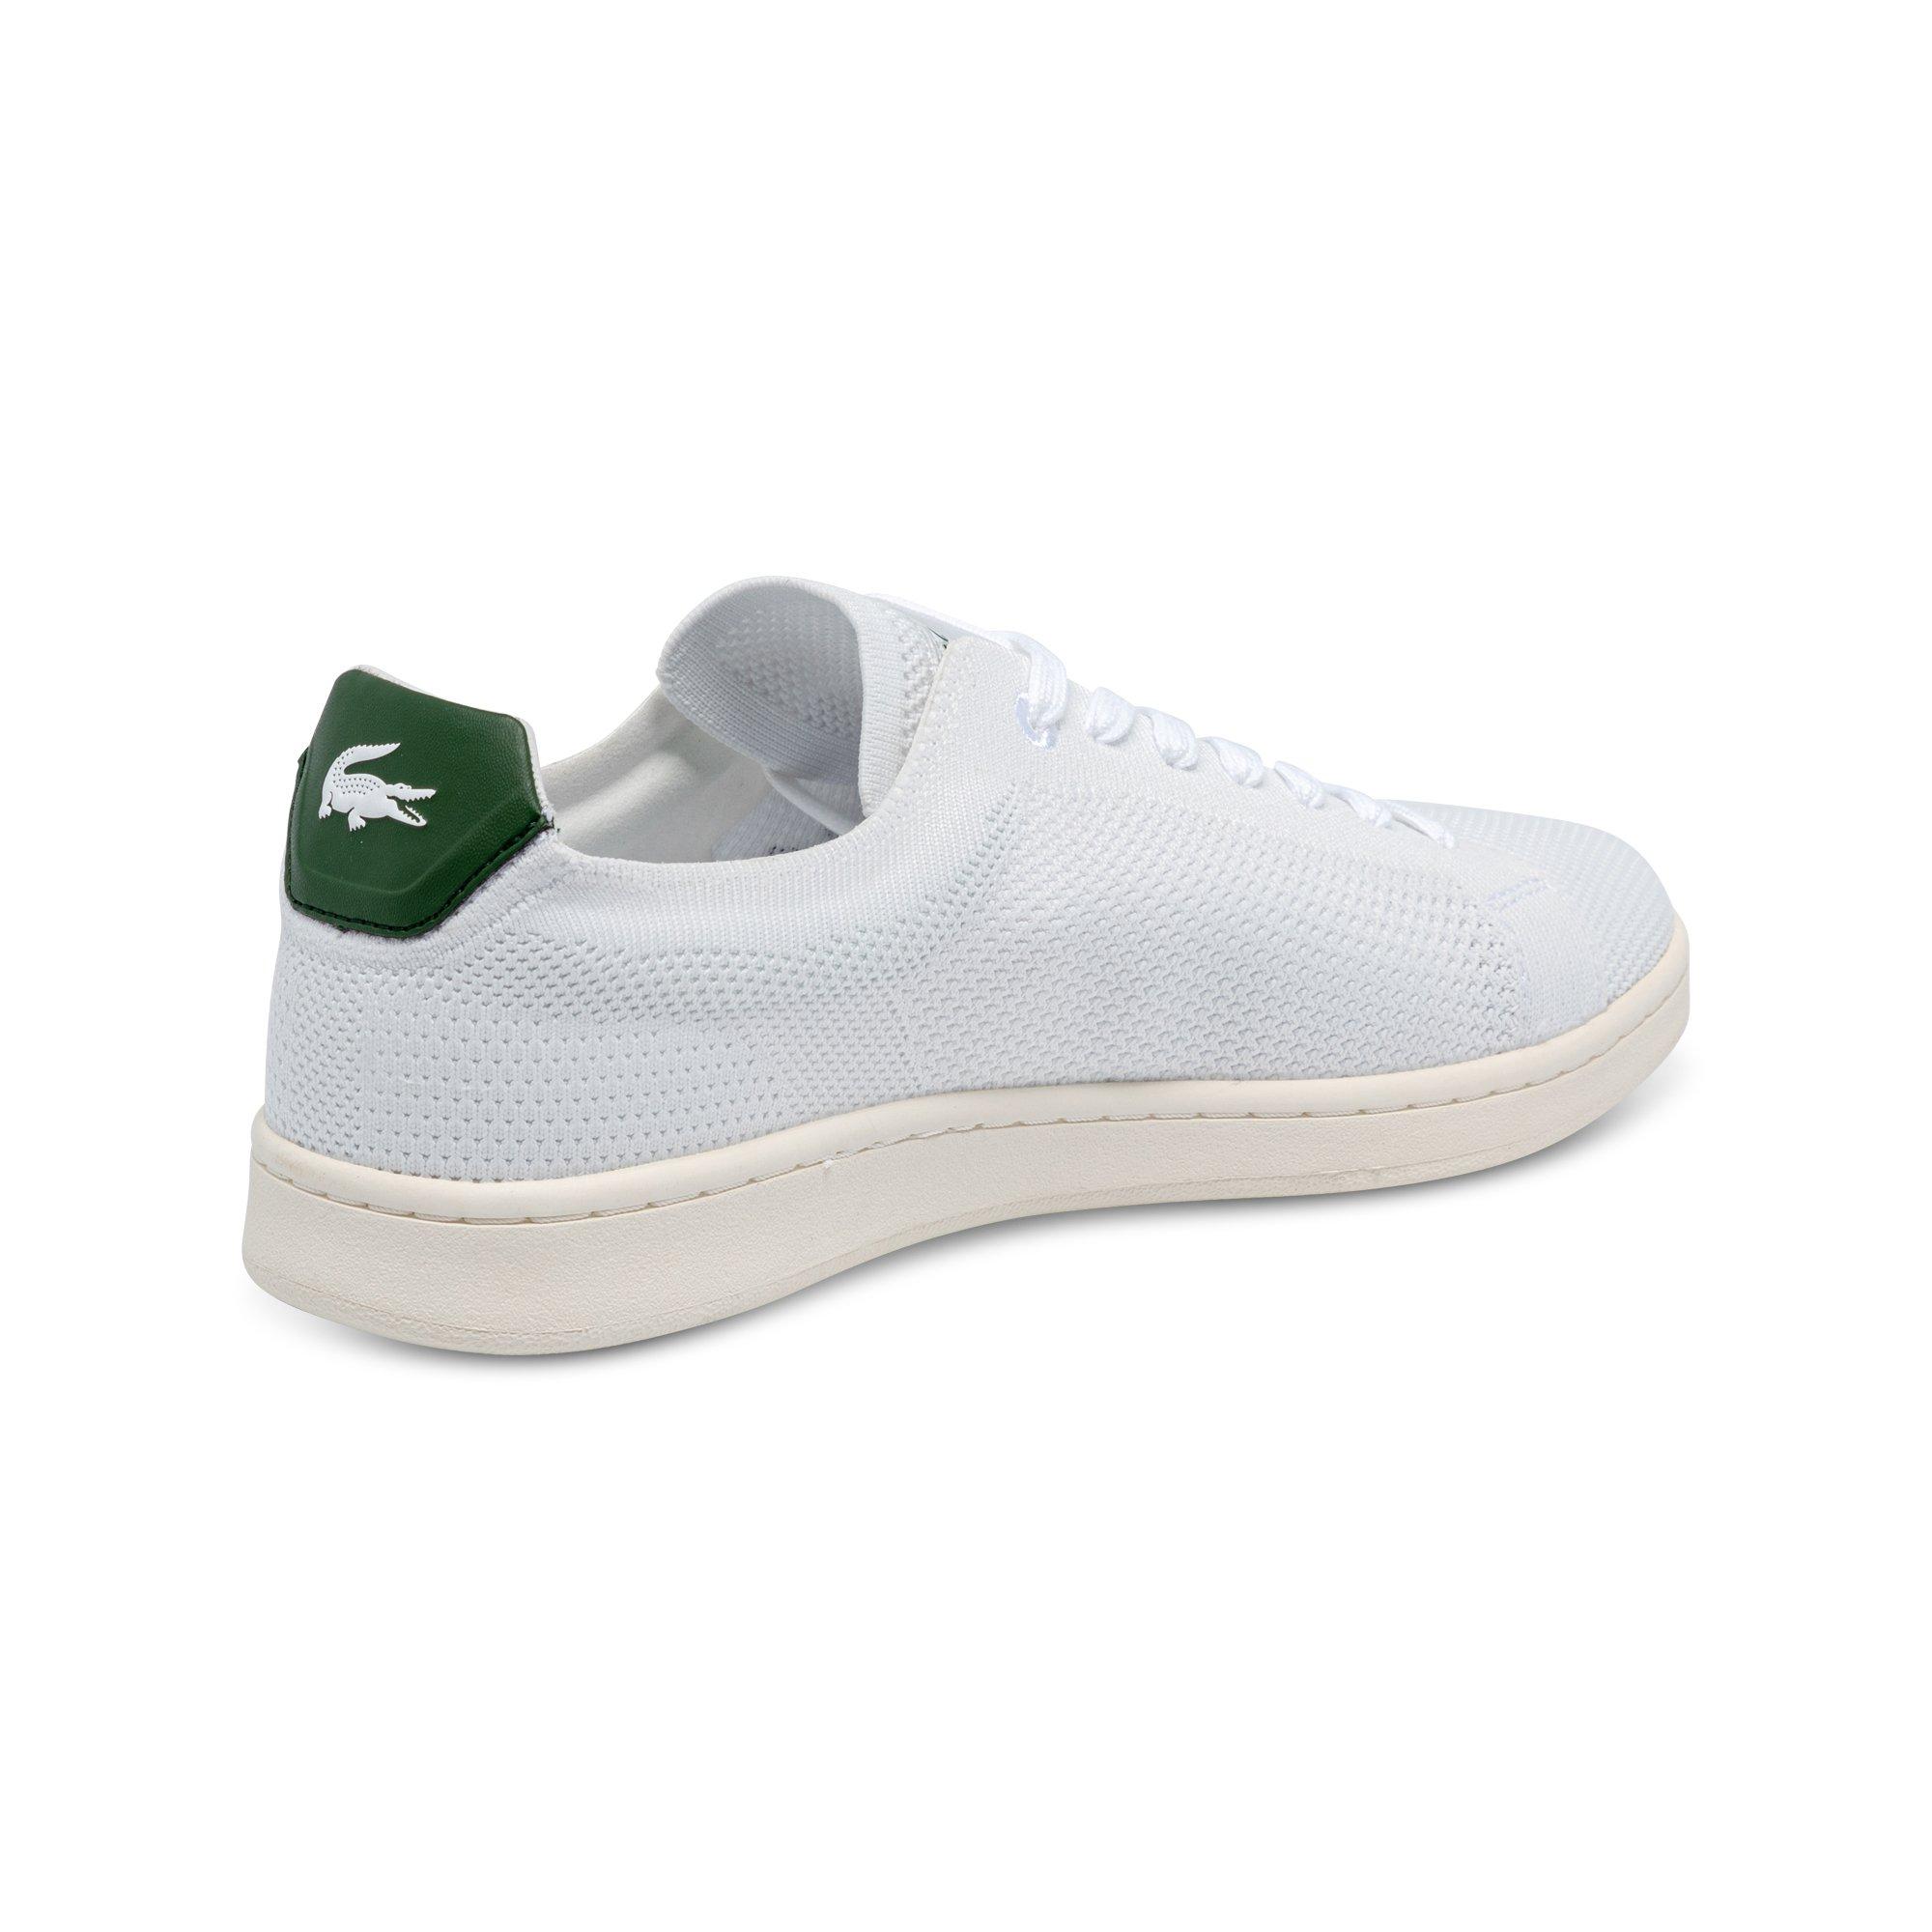 LACOSTE Carnaby Piquee Sneakers basse 